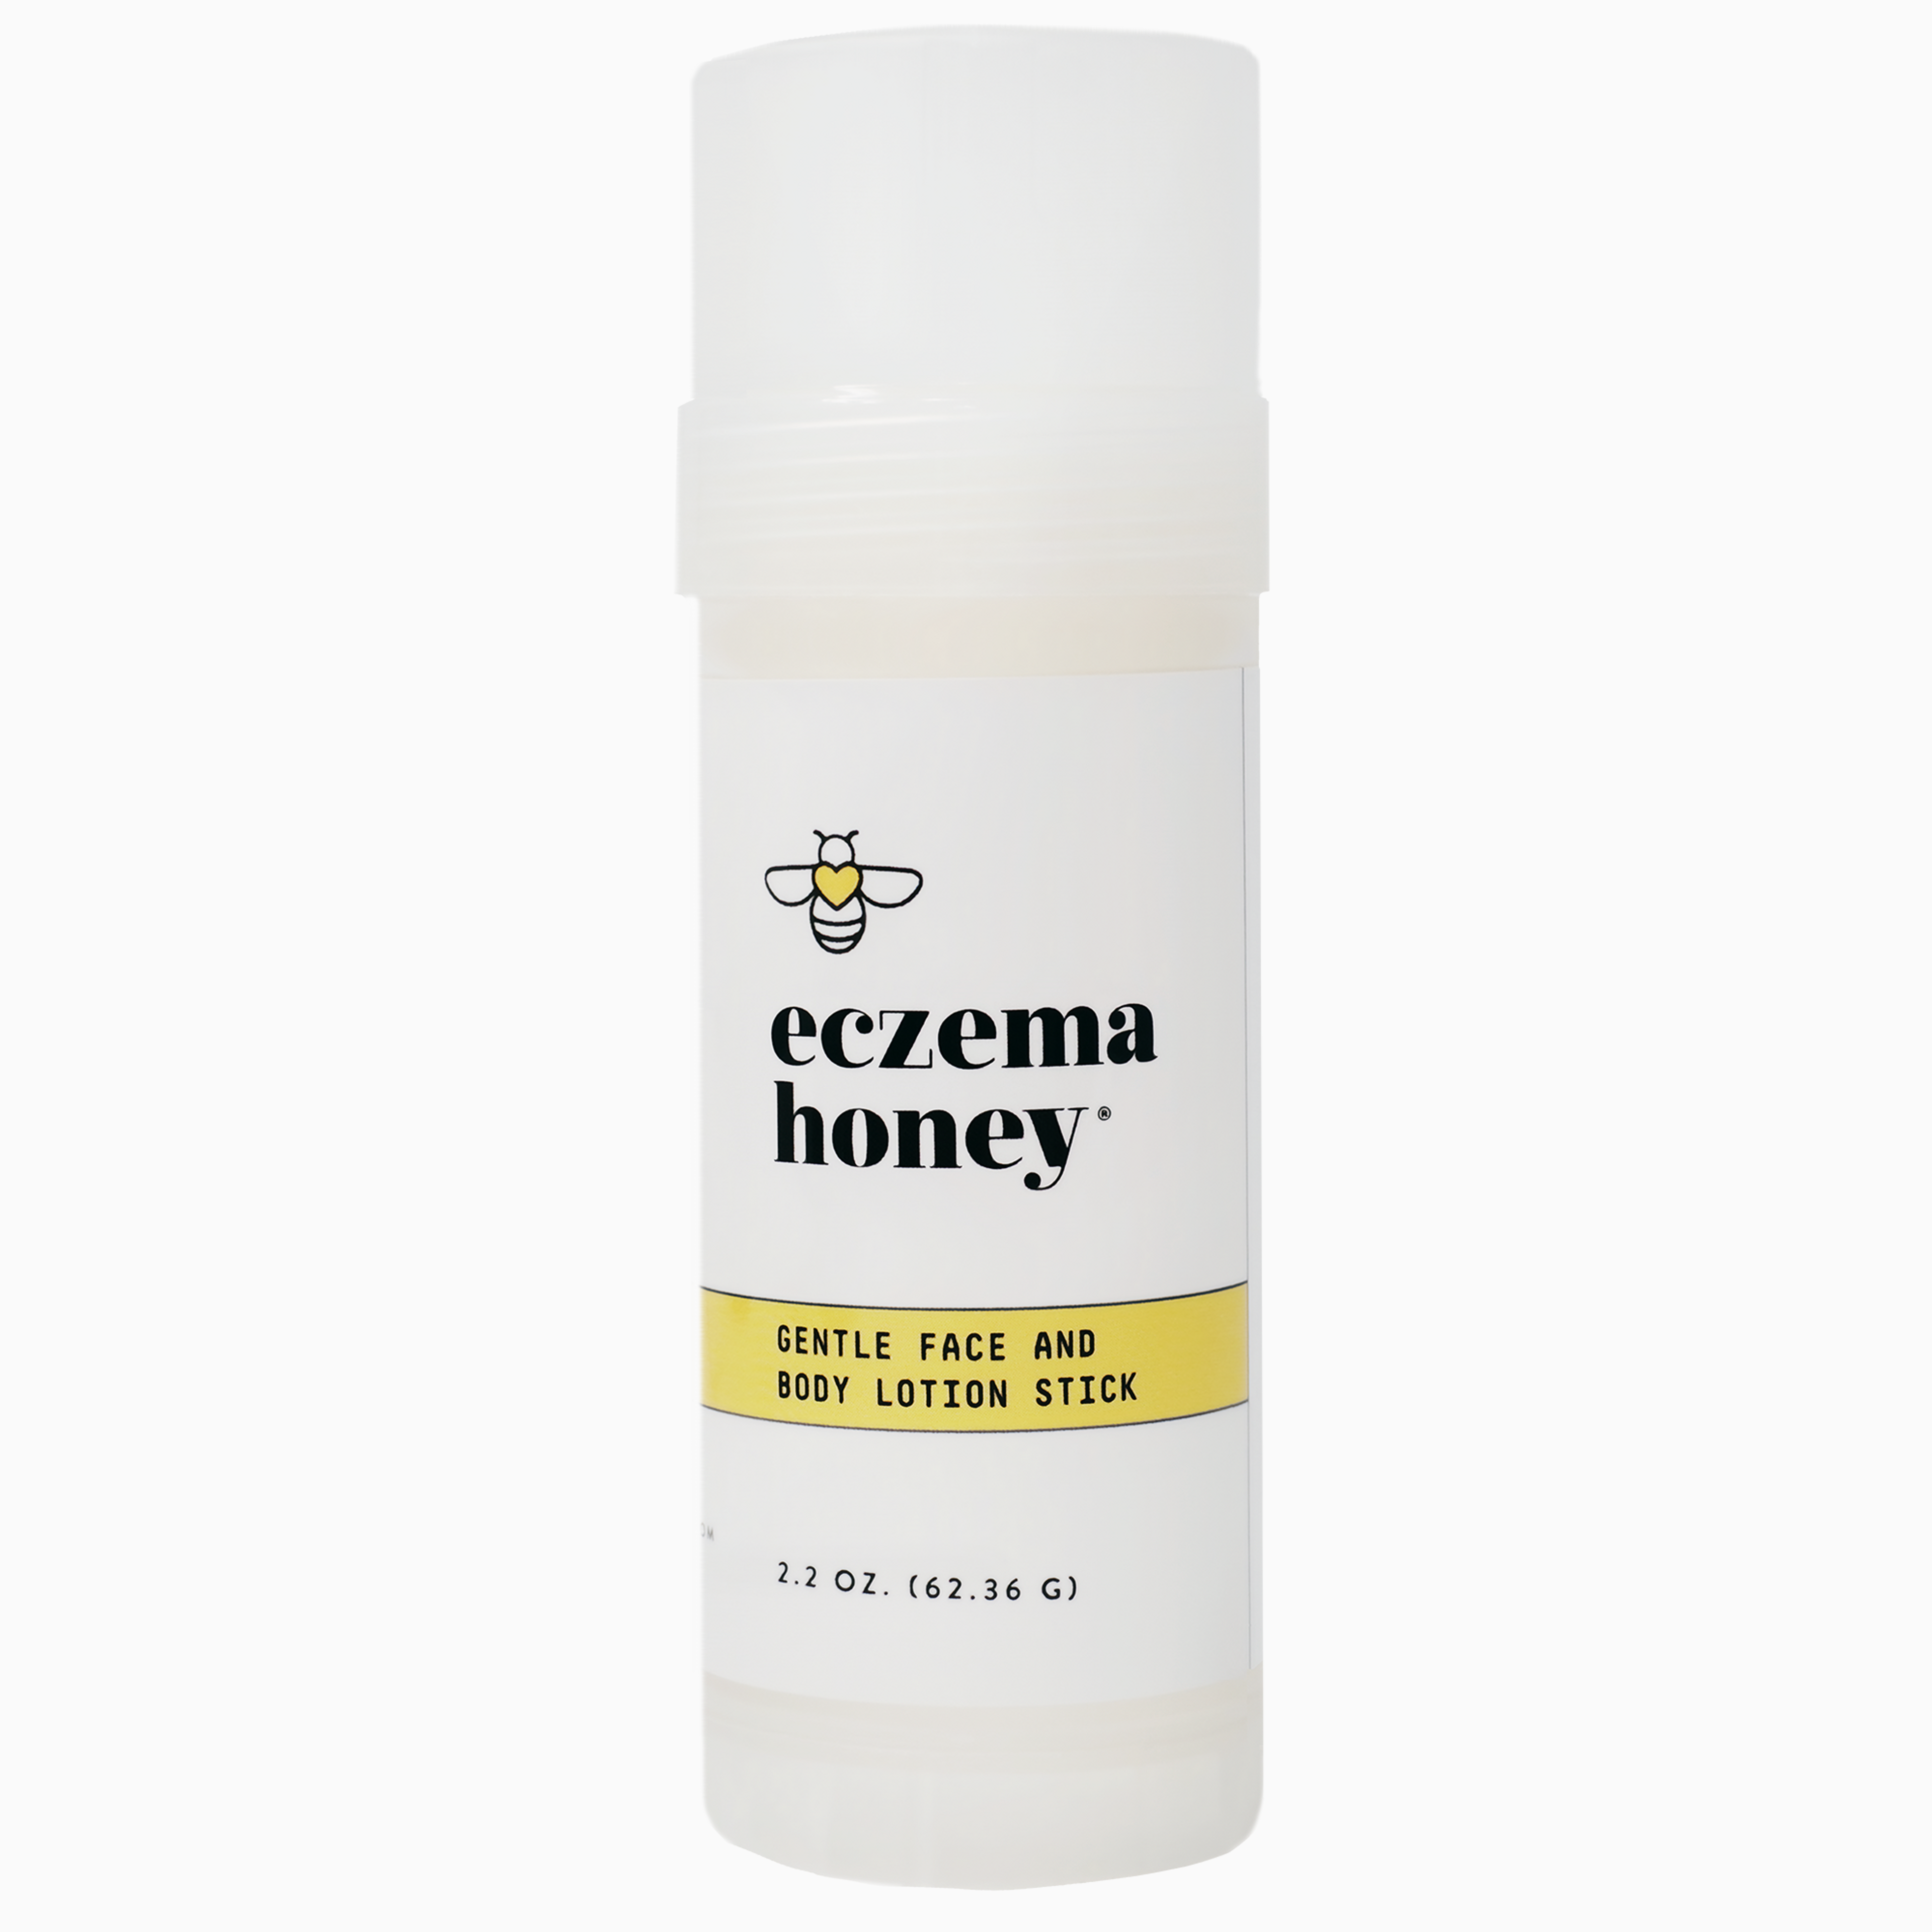 Eczema Honey Gentle Face and Body Lotion Stick